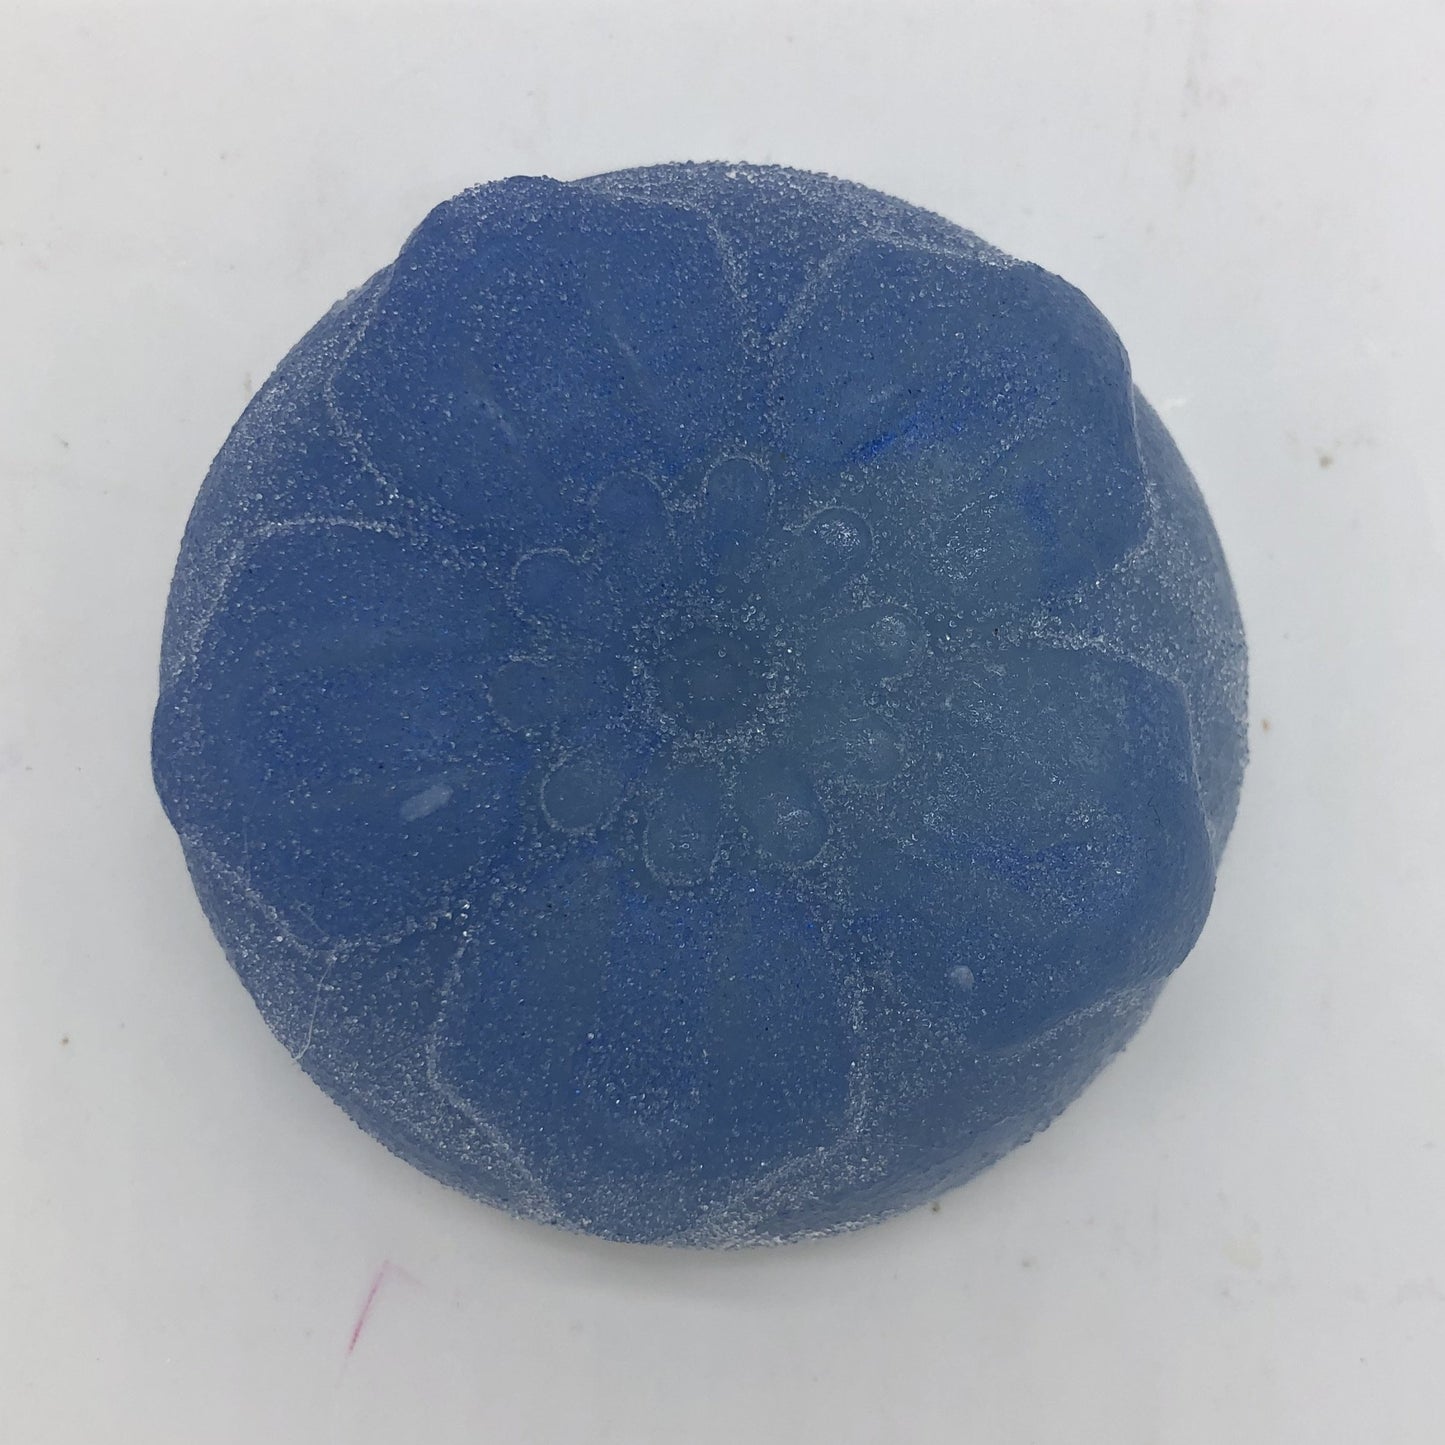 Solid blue round floral soap.